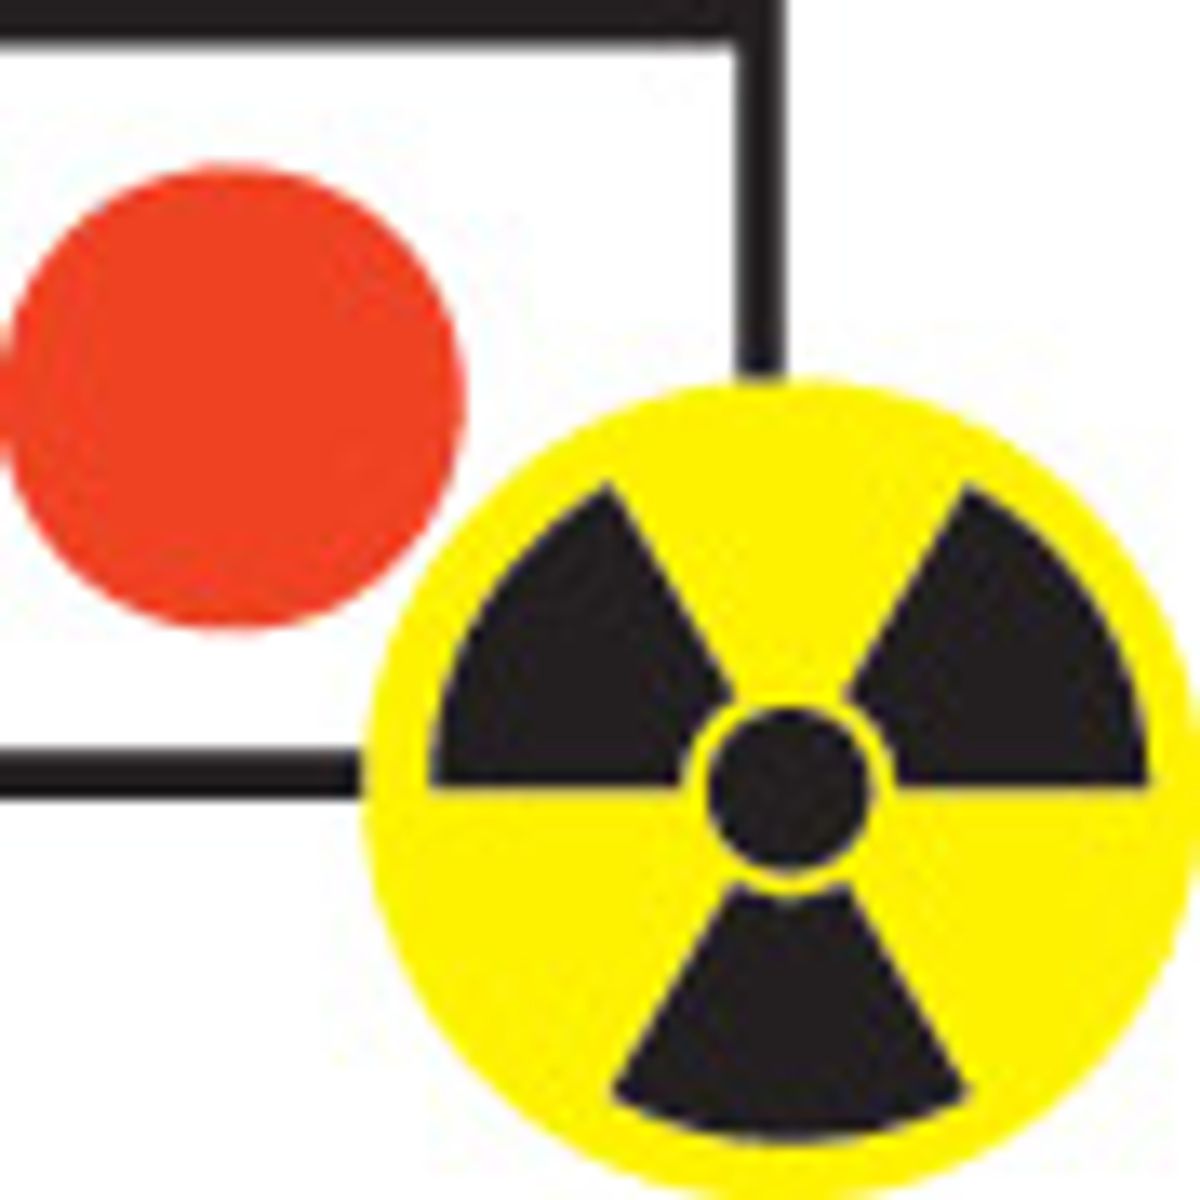 No Nukes and No Blackouts in Japan?